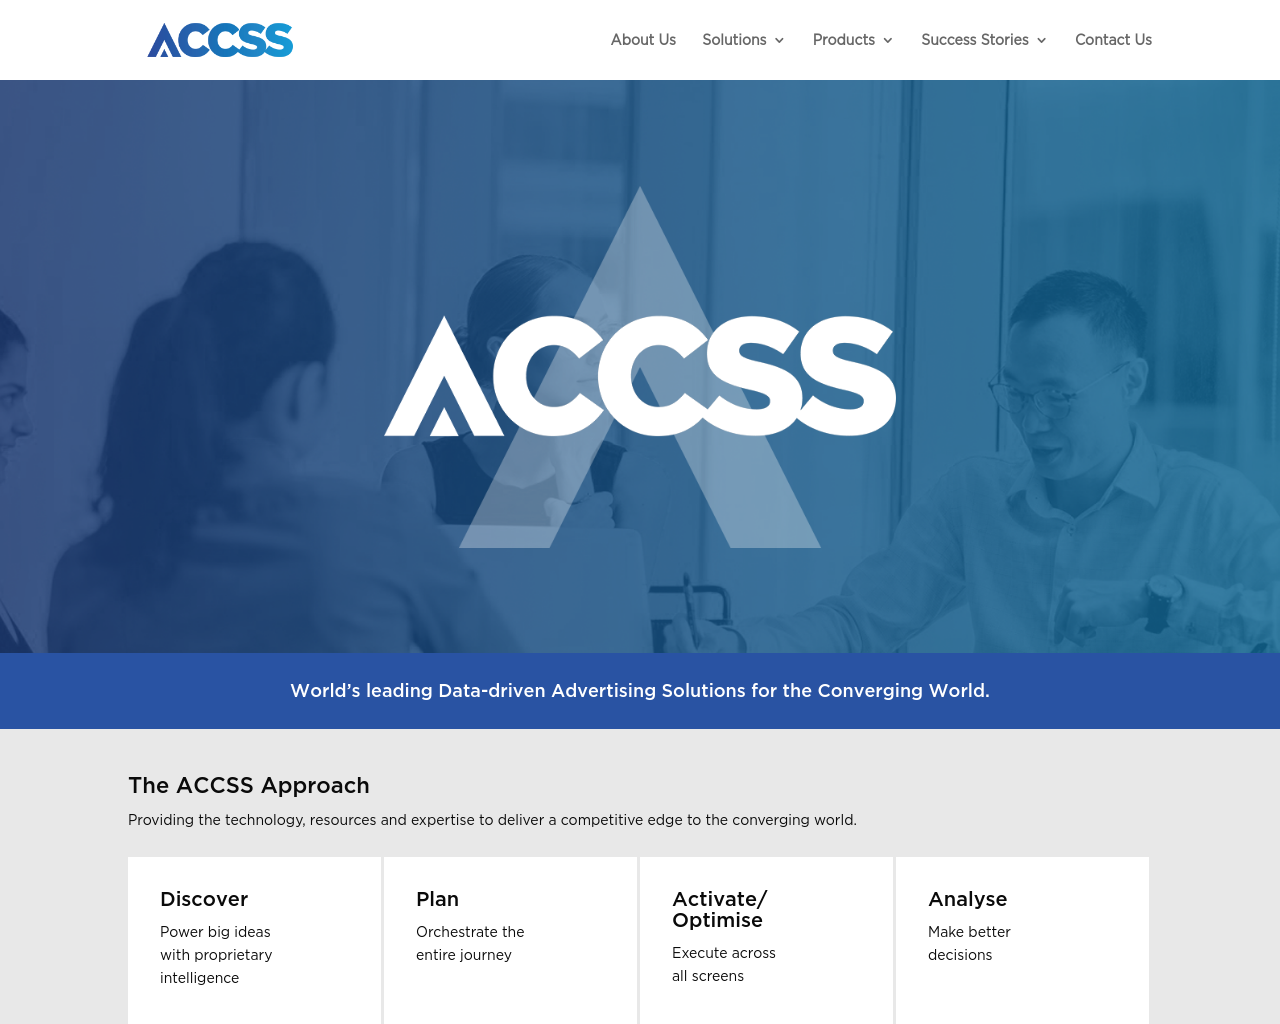 www.accss.asia